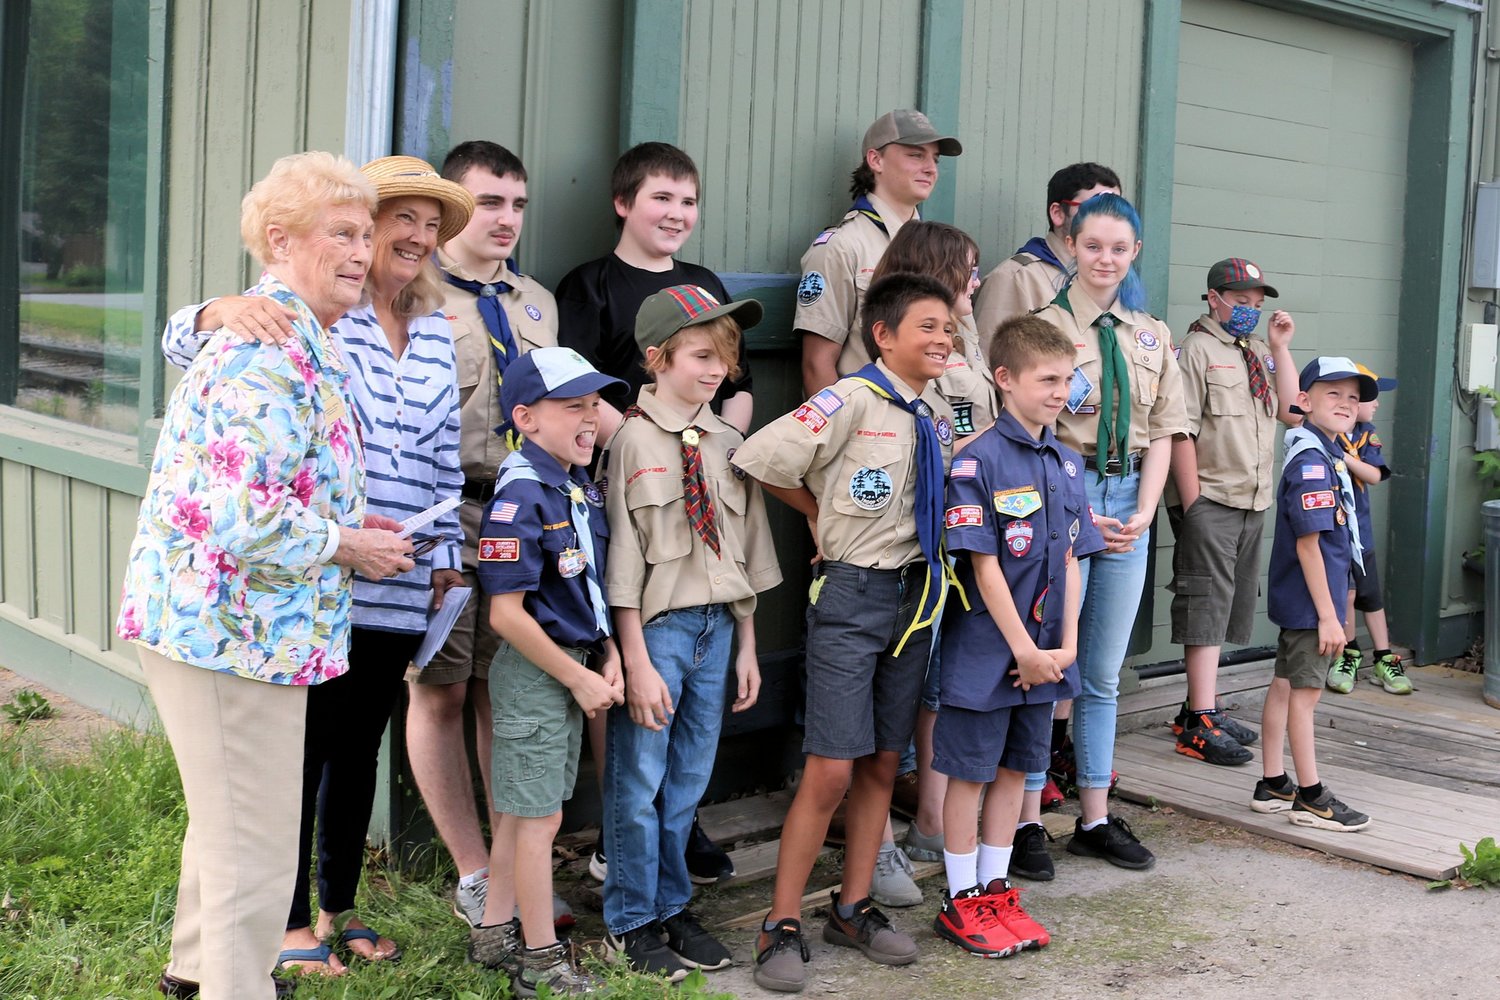 PATRIOTIC EFFORT — Holland Patent NSDAR Regent Beverly Seifried and Vice Regent Kitty Squire pose with a group of local Scouts who helped dispose of flags as part of a flag retirement ritual. The chapter and volunteers properly disposed of 2,447 flags.